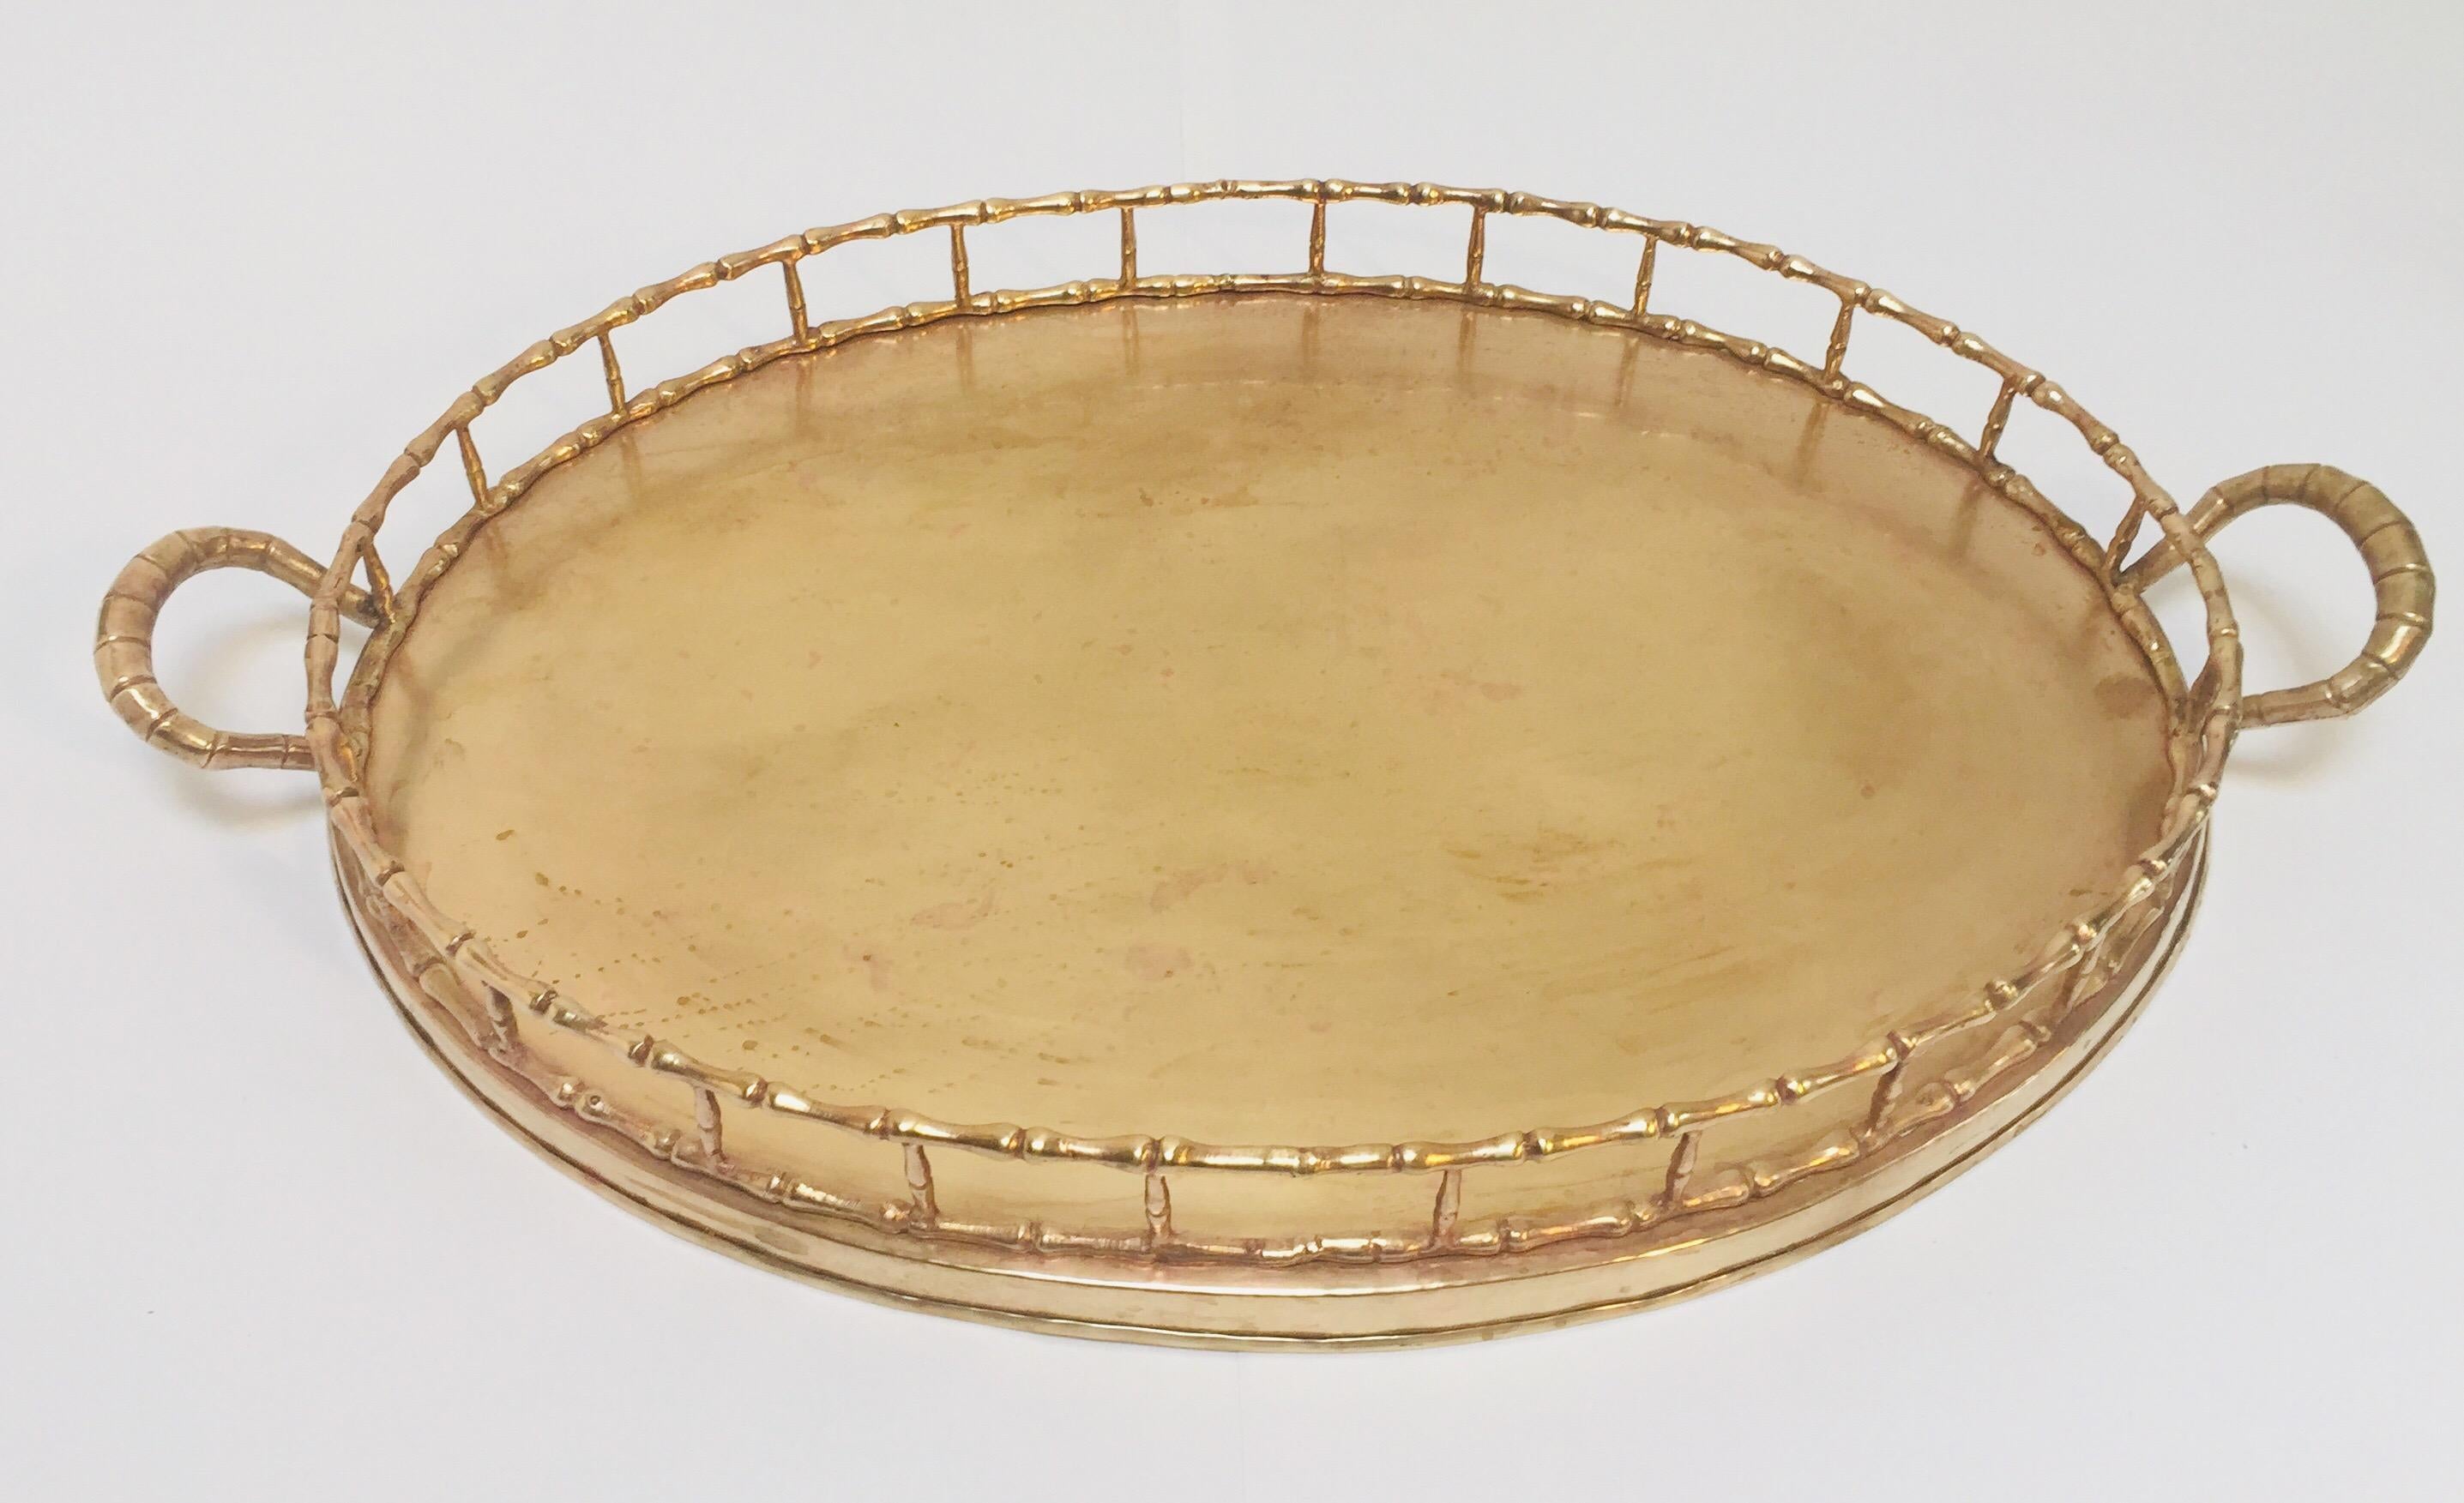 Hollywood Regency serving polished brass bamboo oval tray.
A vintage large oval serving brass tray in faux bamboo.
Age appropriate patina.
No stamps present from the maker.
Dimensions:
2 1/4